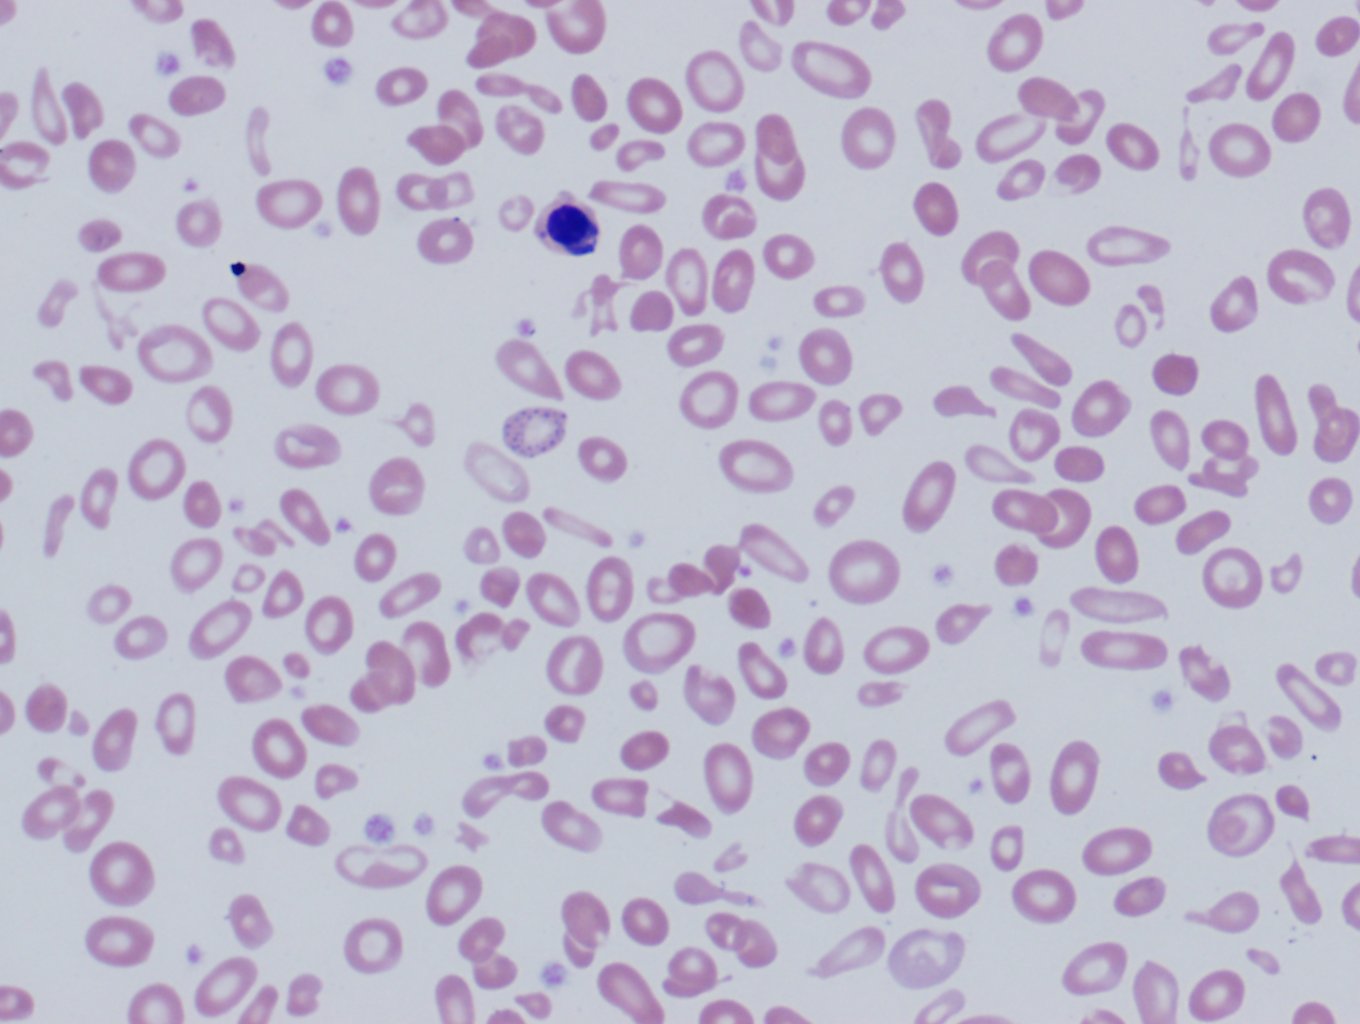 Image 1. Peripheral blood, beta-thalassemia (clinically intermedia) showing anisopoikilocytosis, a nucleated red cell, and basophilic stippling.